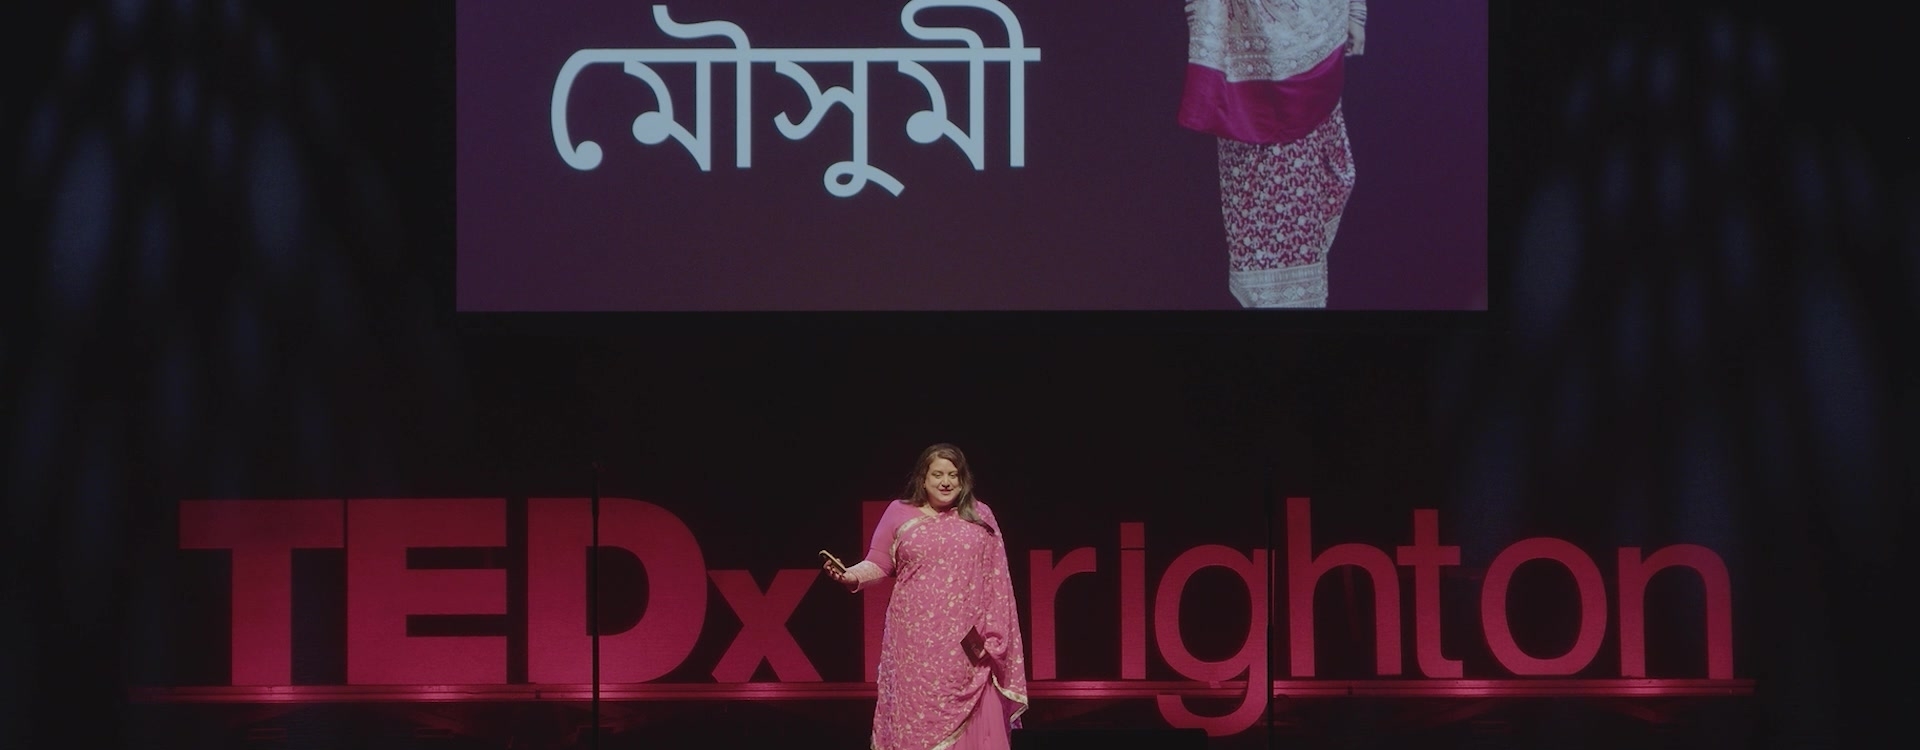 TedX Brighton - How Can We Value The Power In Our Differences?